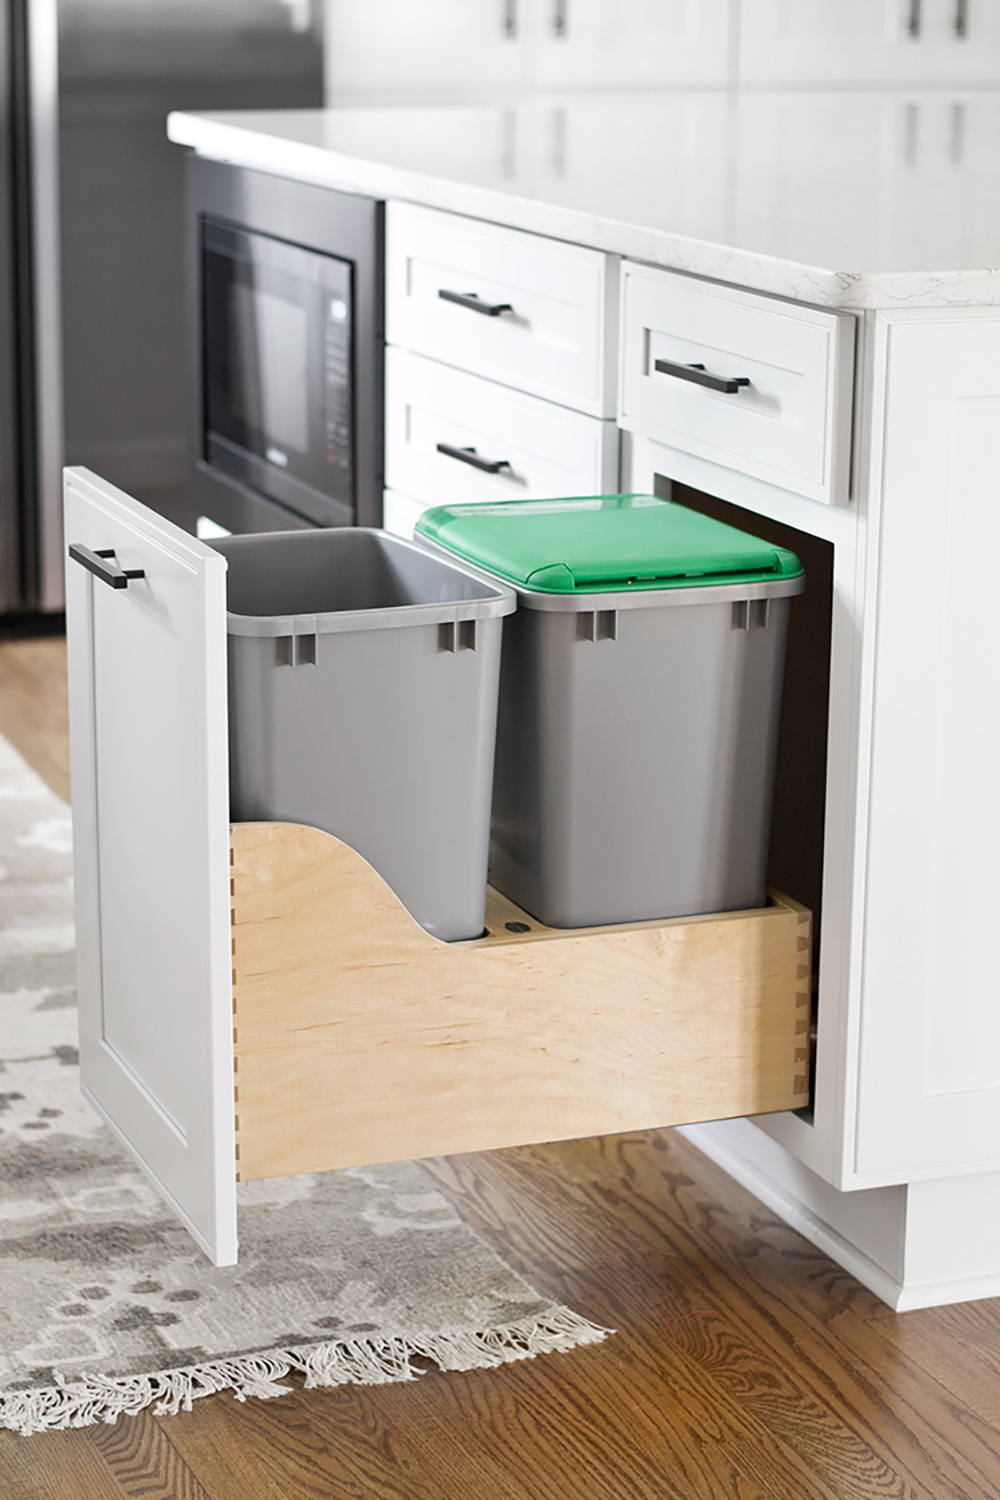 A roll out cabinet drawer reveals hidden trash and recycling bins.